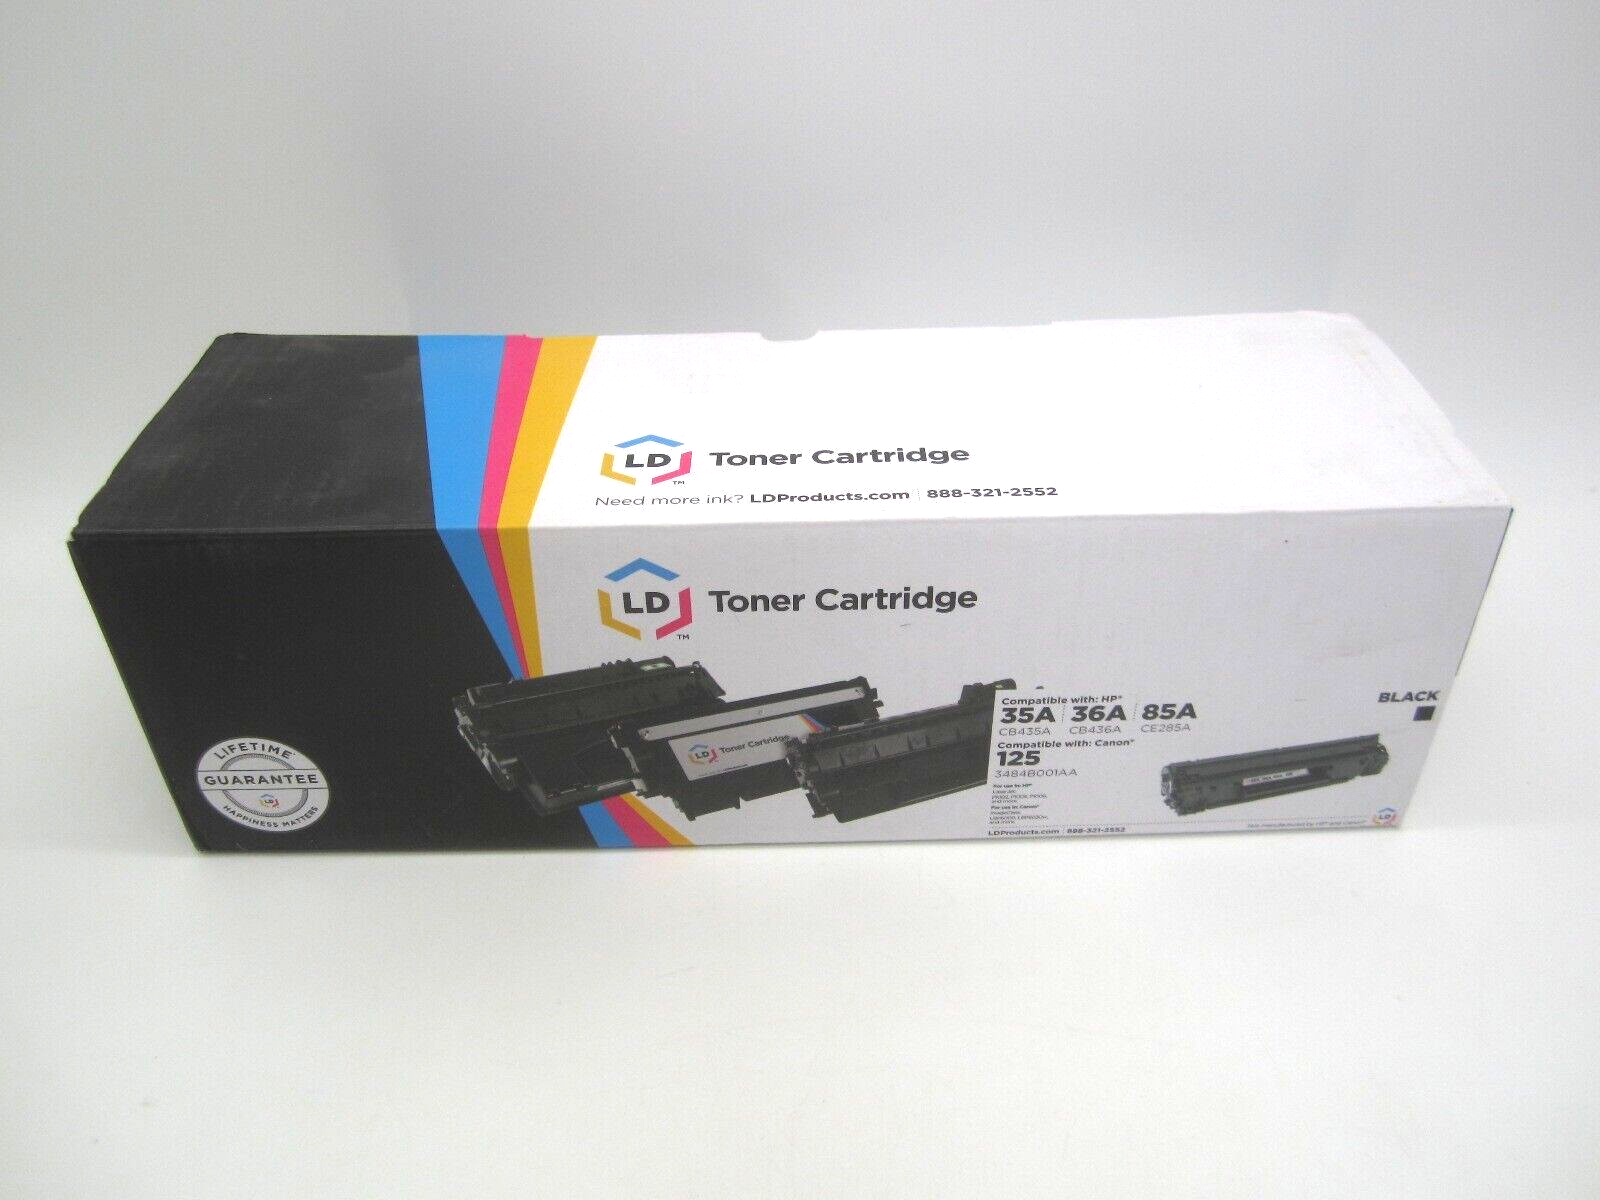 LD Products Toner Cartridge (Black) Compatible w/ 35a 36a 85a - Canon 125